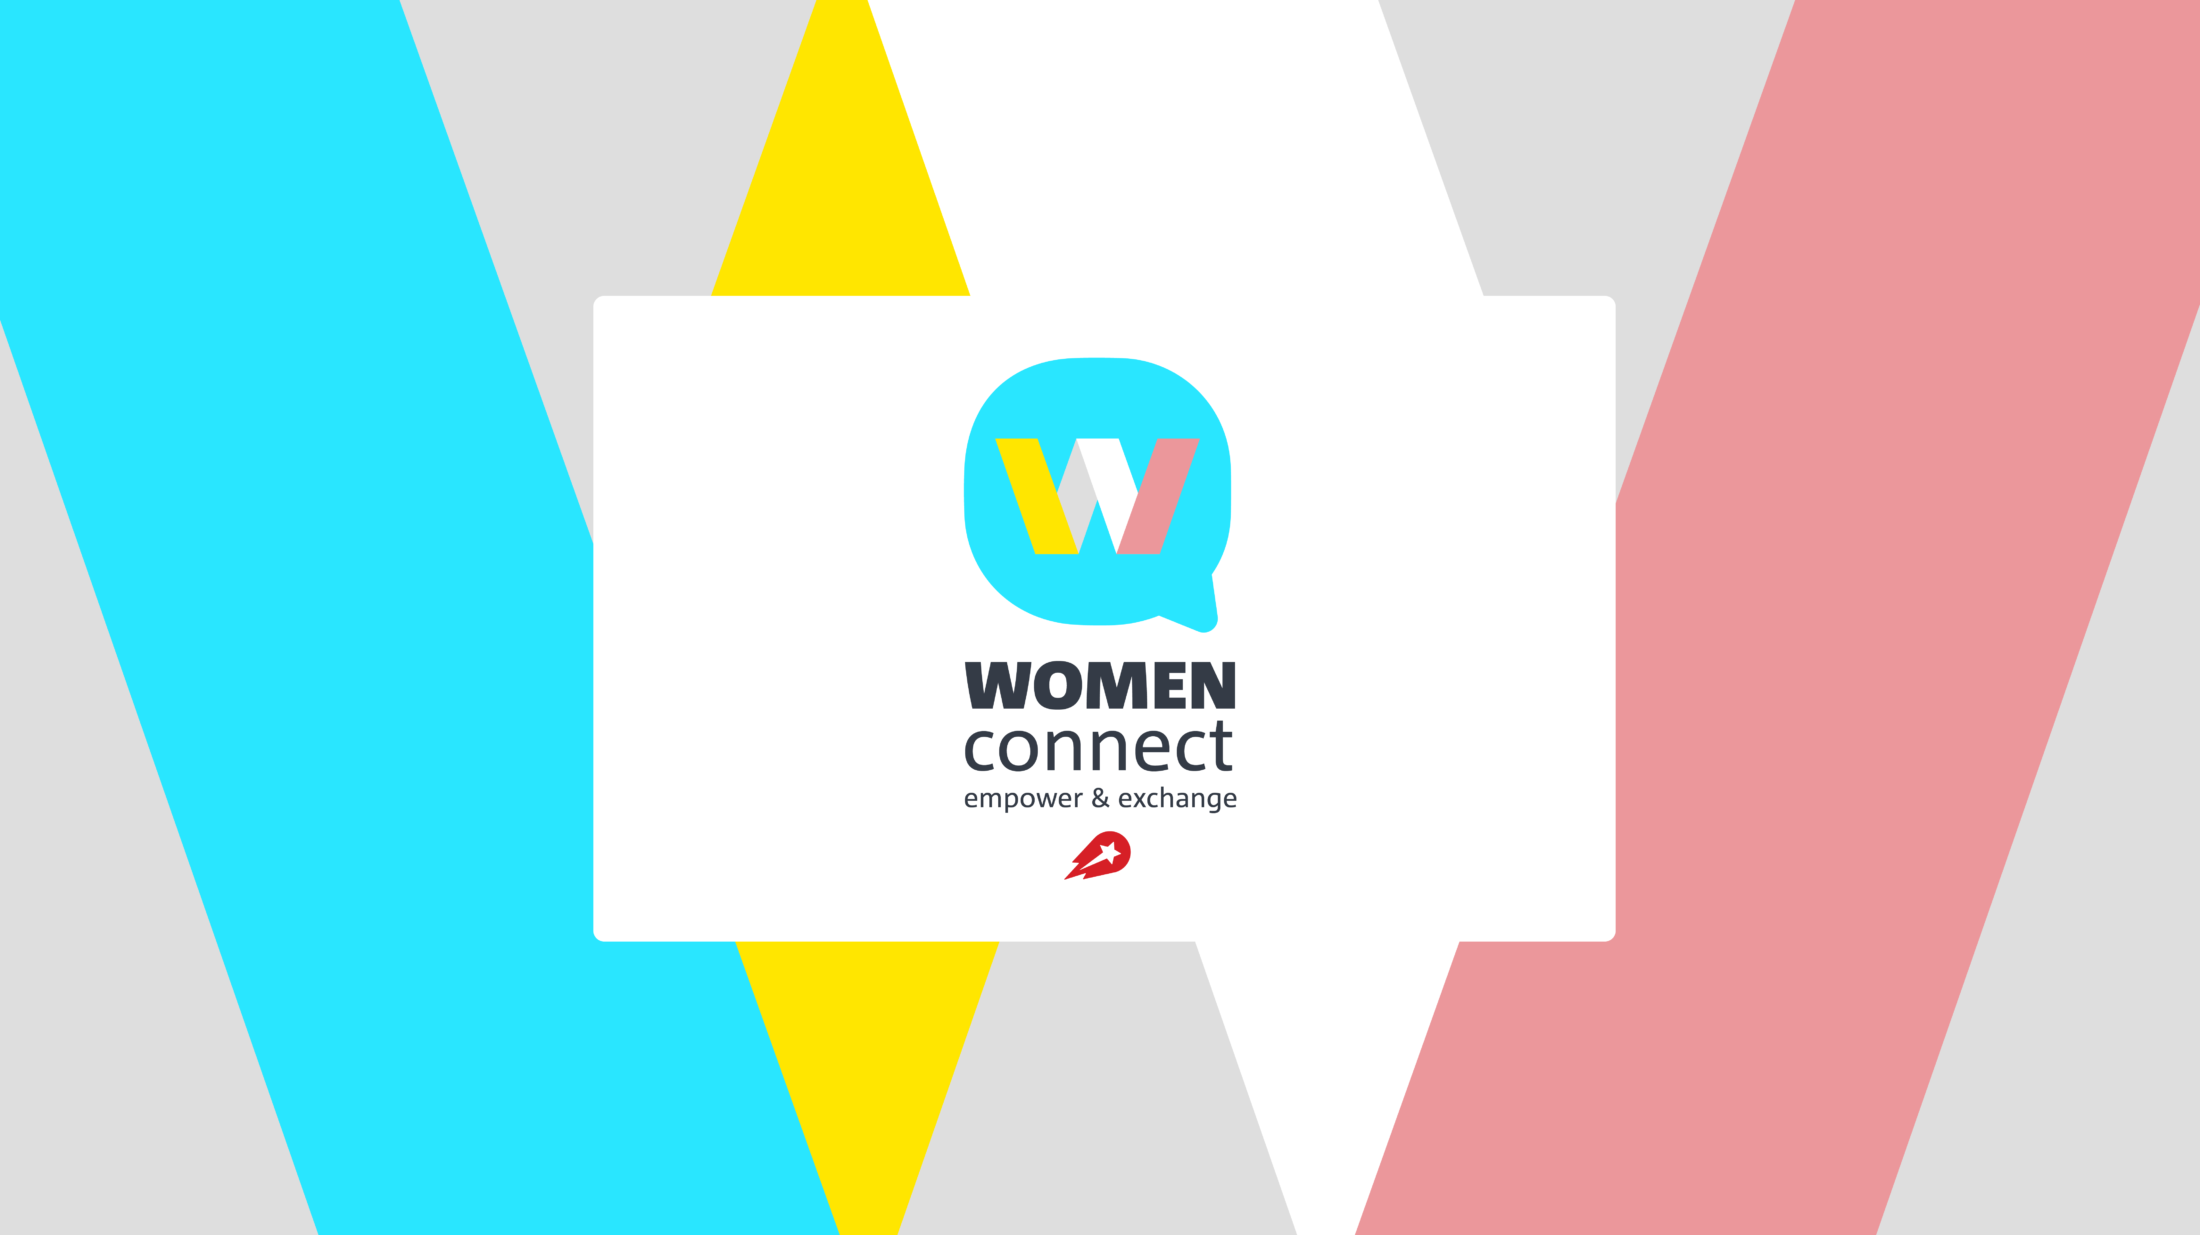 Creating events that matter: Behind the scenes at Women Connect